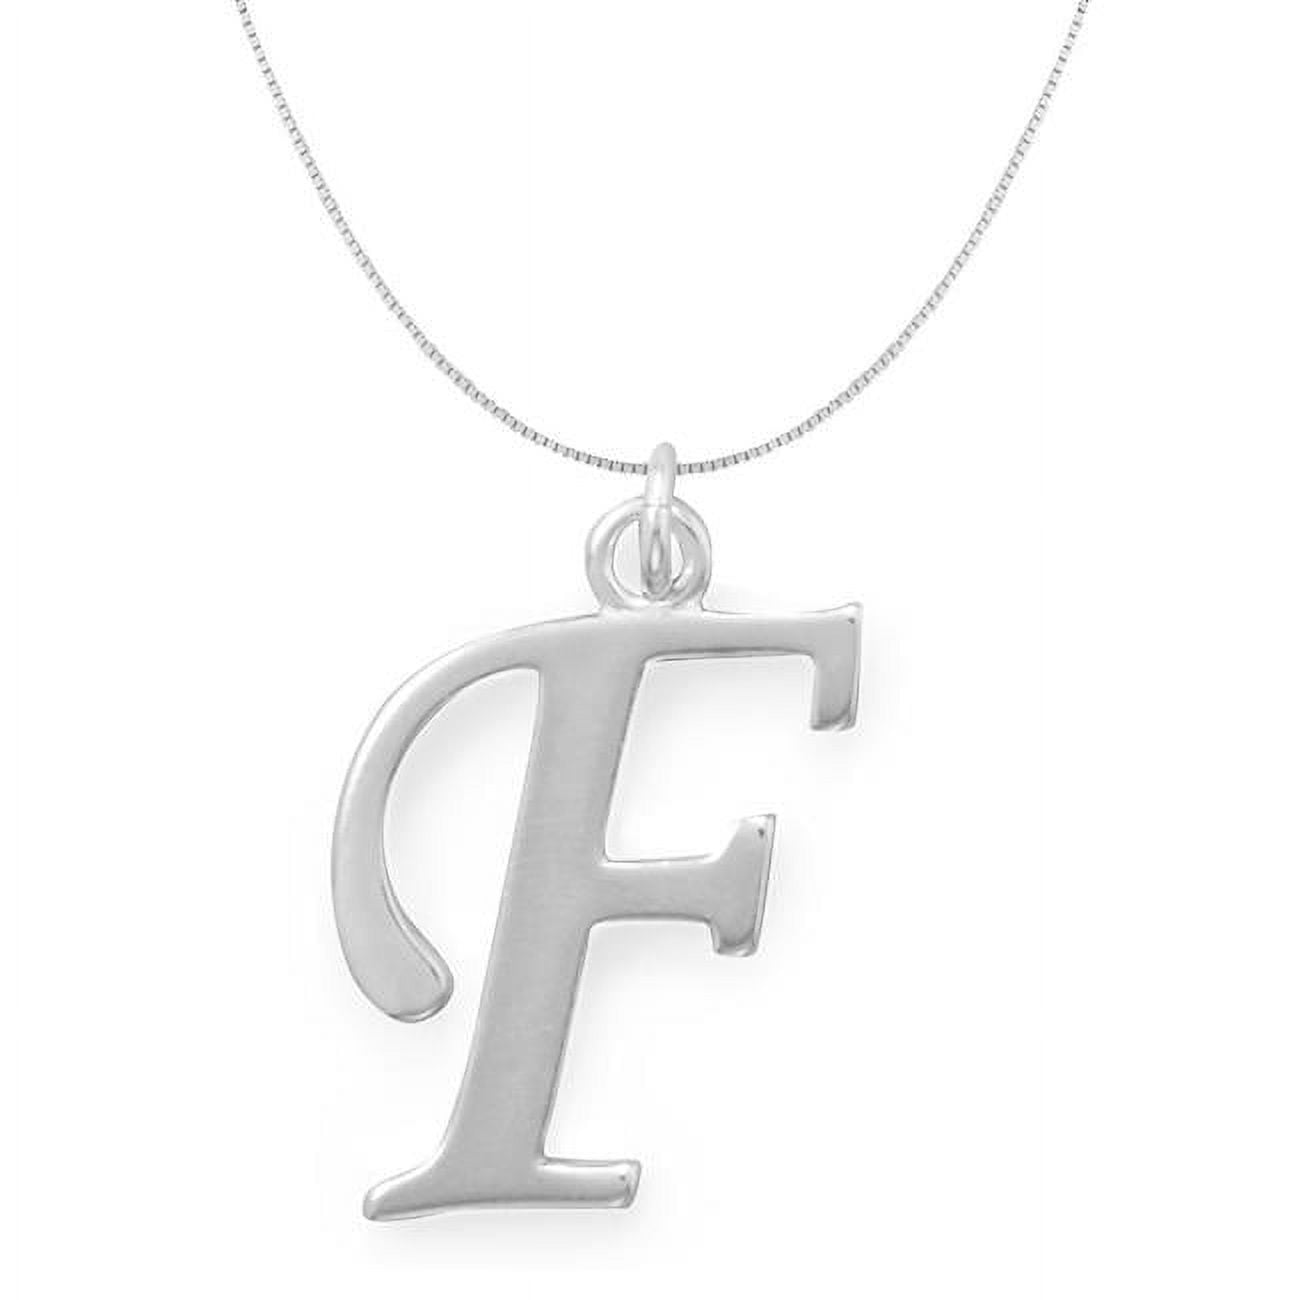 74661f-bx20 20 In. Sterling Silver Initial Letter F Pendant With 0.70 Mm Thin Box Chain